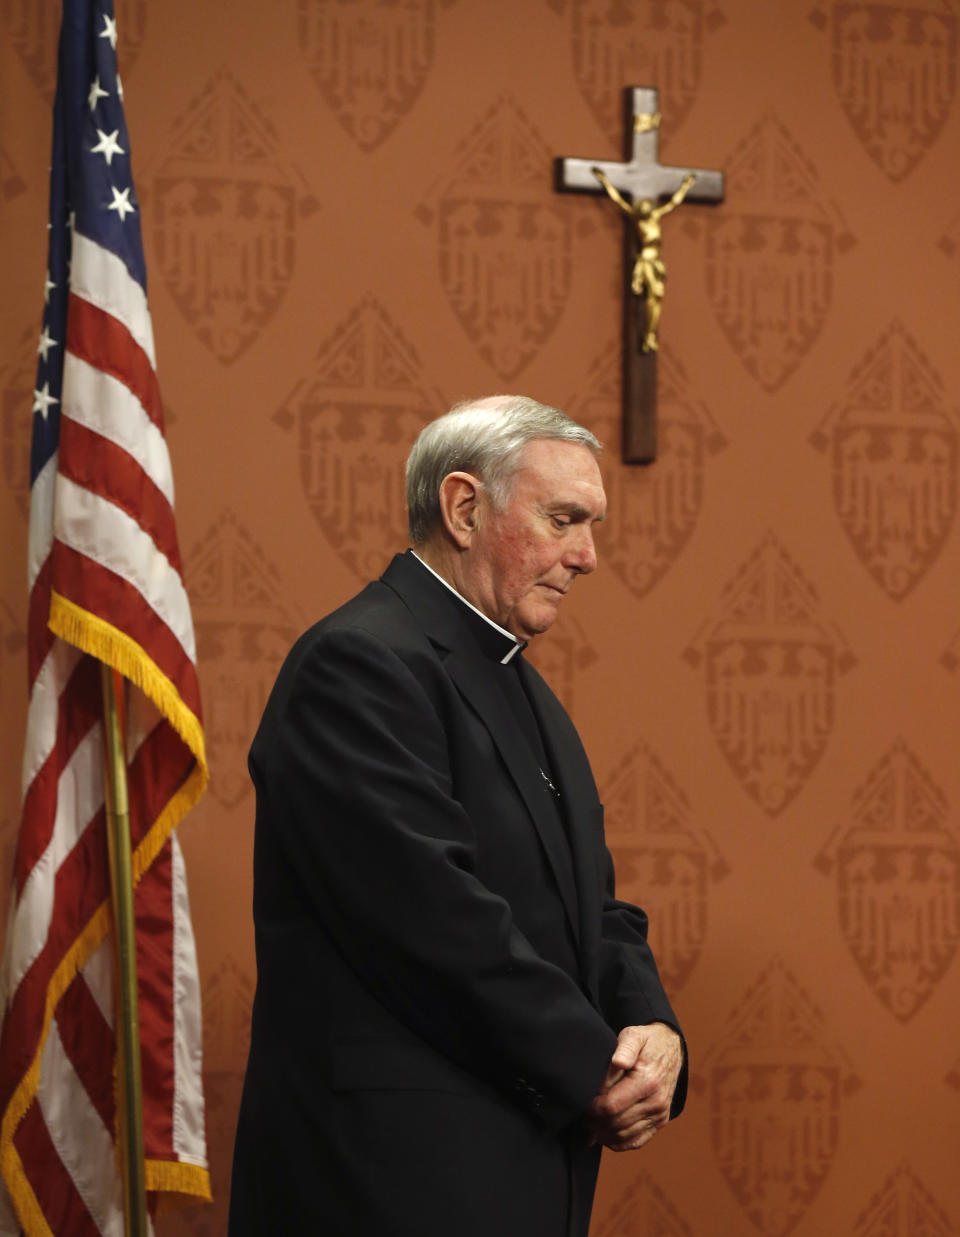 Bishop Francis Kane, Vicar General of the Archdiocese of Chicago, walks to the microphone to respond to a question about the release of 6,000 pages of documents detailing what it knew about decades of clergy sex abuse allegations and how it handled them during a news conference Wednesday, Jan. 15, 2014, in Chicago. (AP Photo/Charles Rex Arbogast)